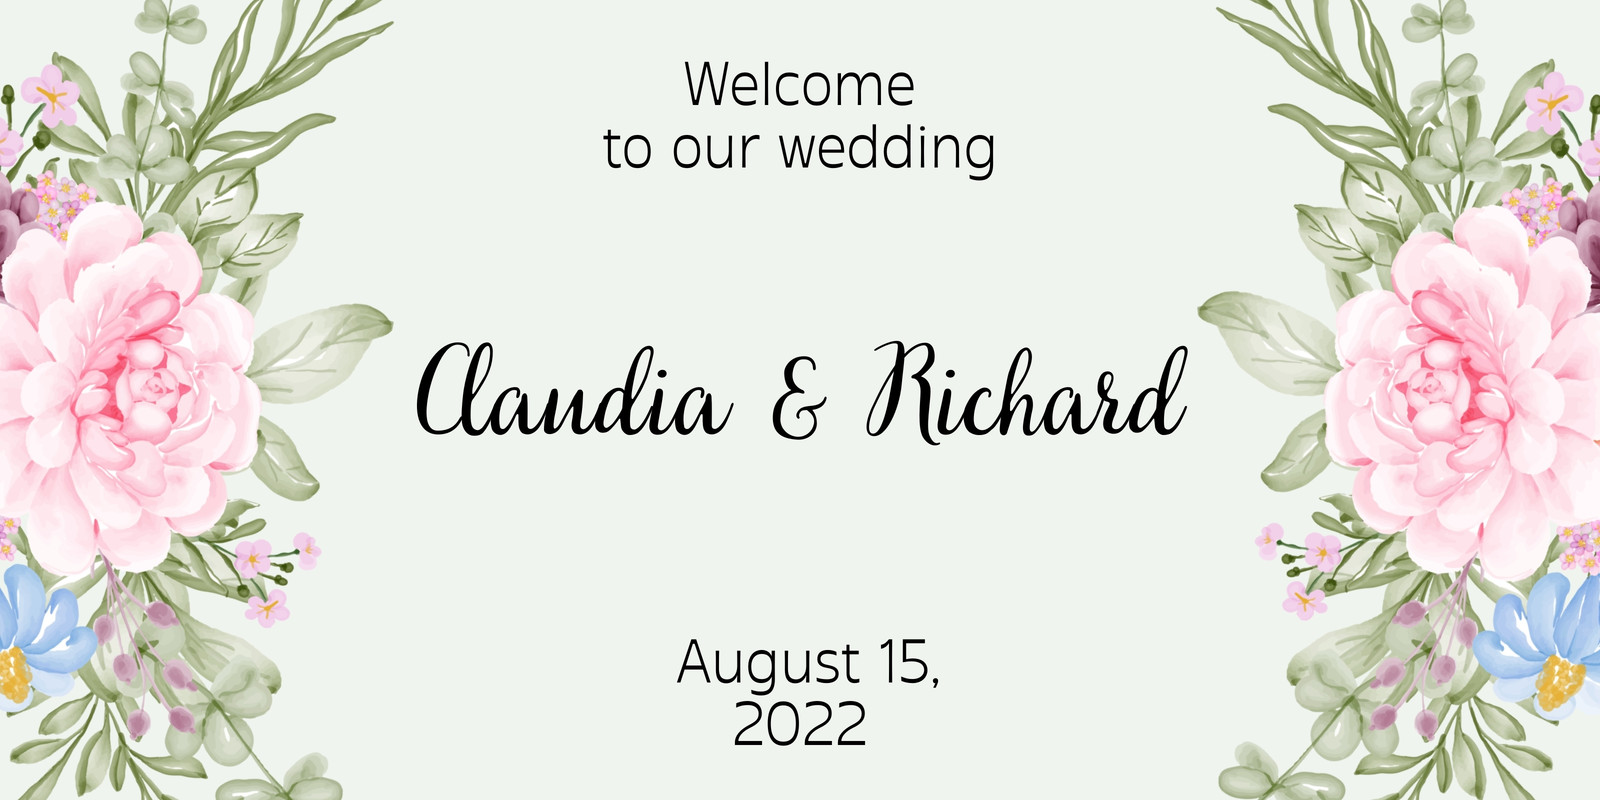 Page 11 - Free customizable wedding banner templates | Canva